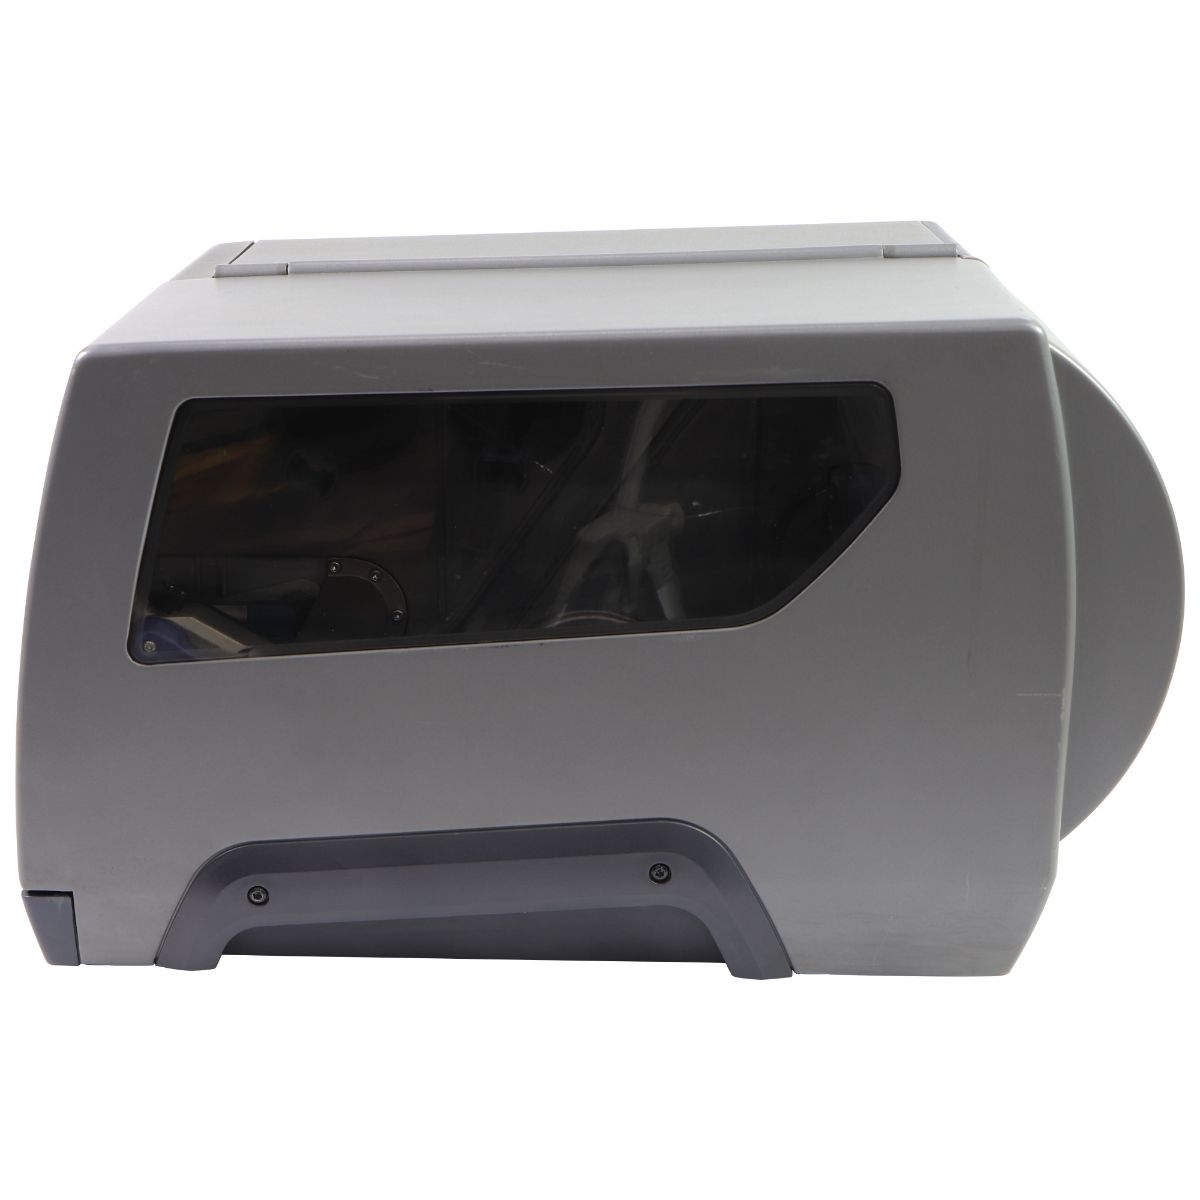 FAIR Intermac PM43 Wi-Fi Thermal Label Printer (No Power Cable) PM43A0100000020